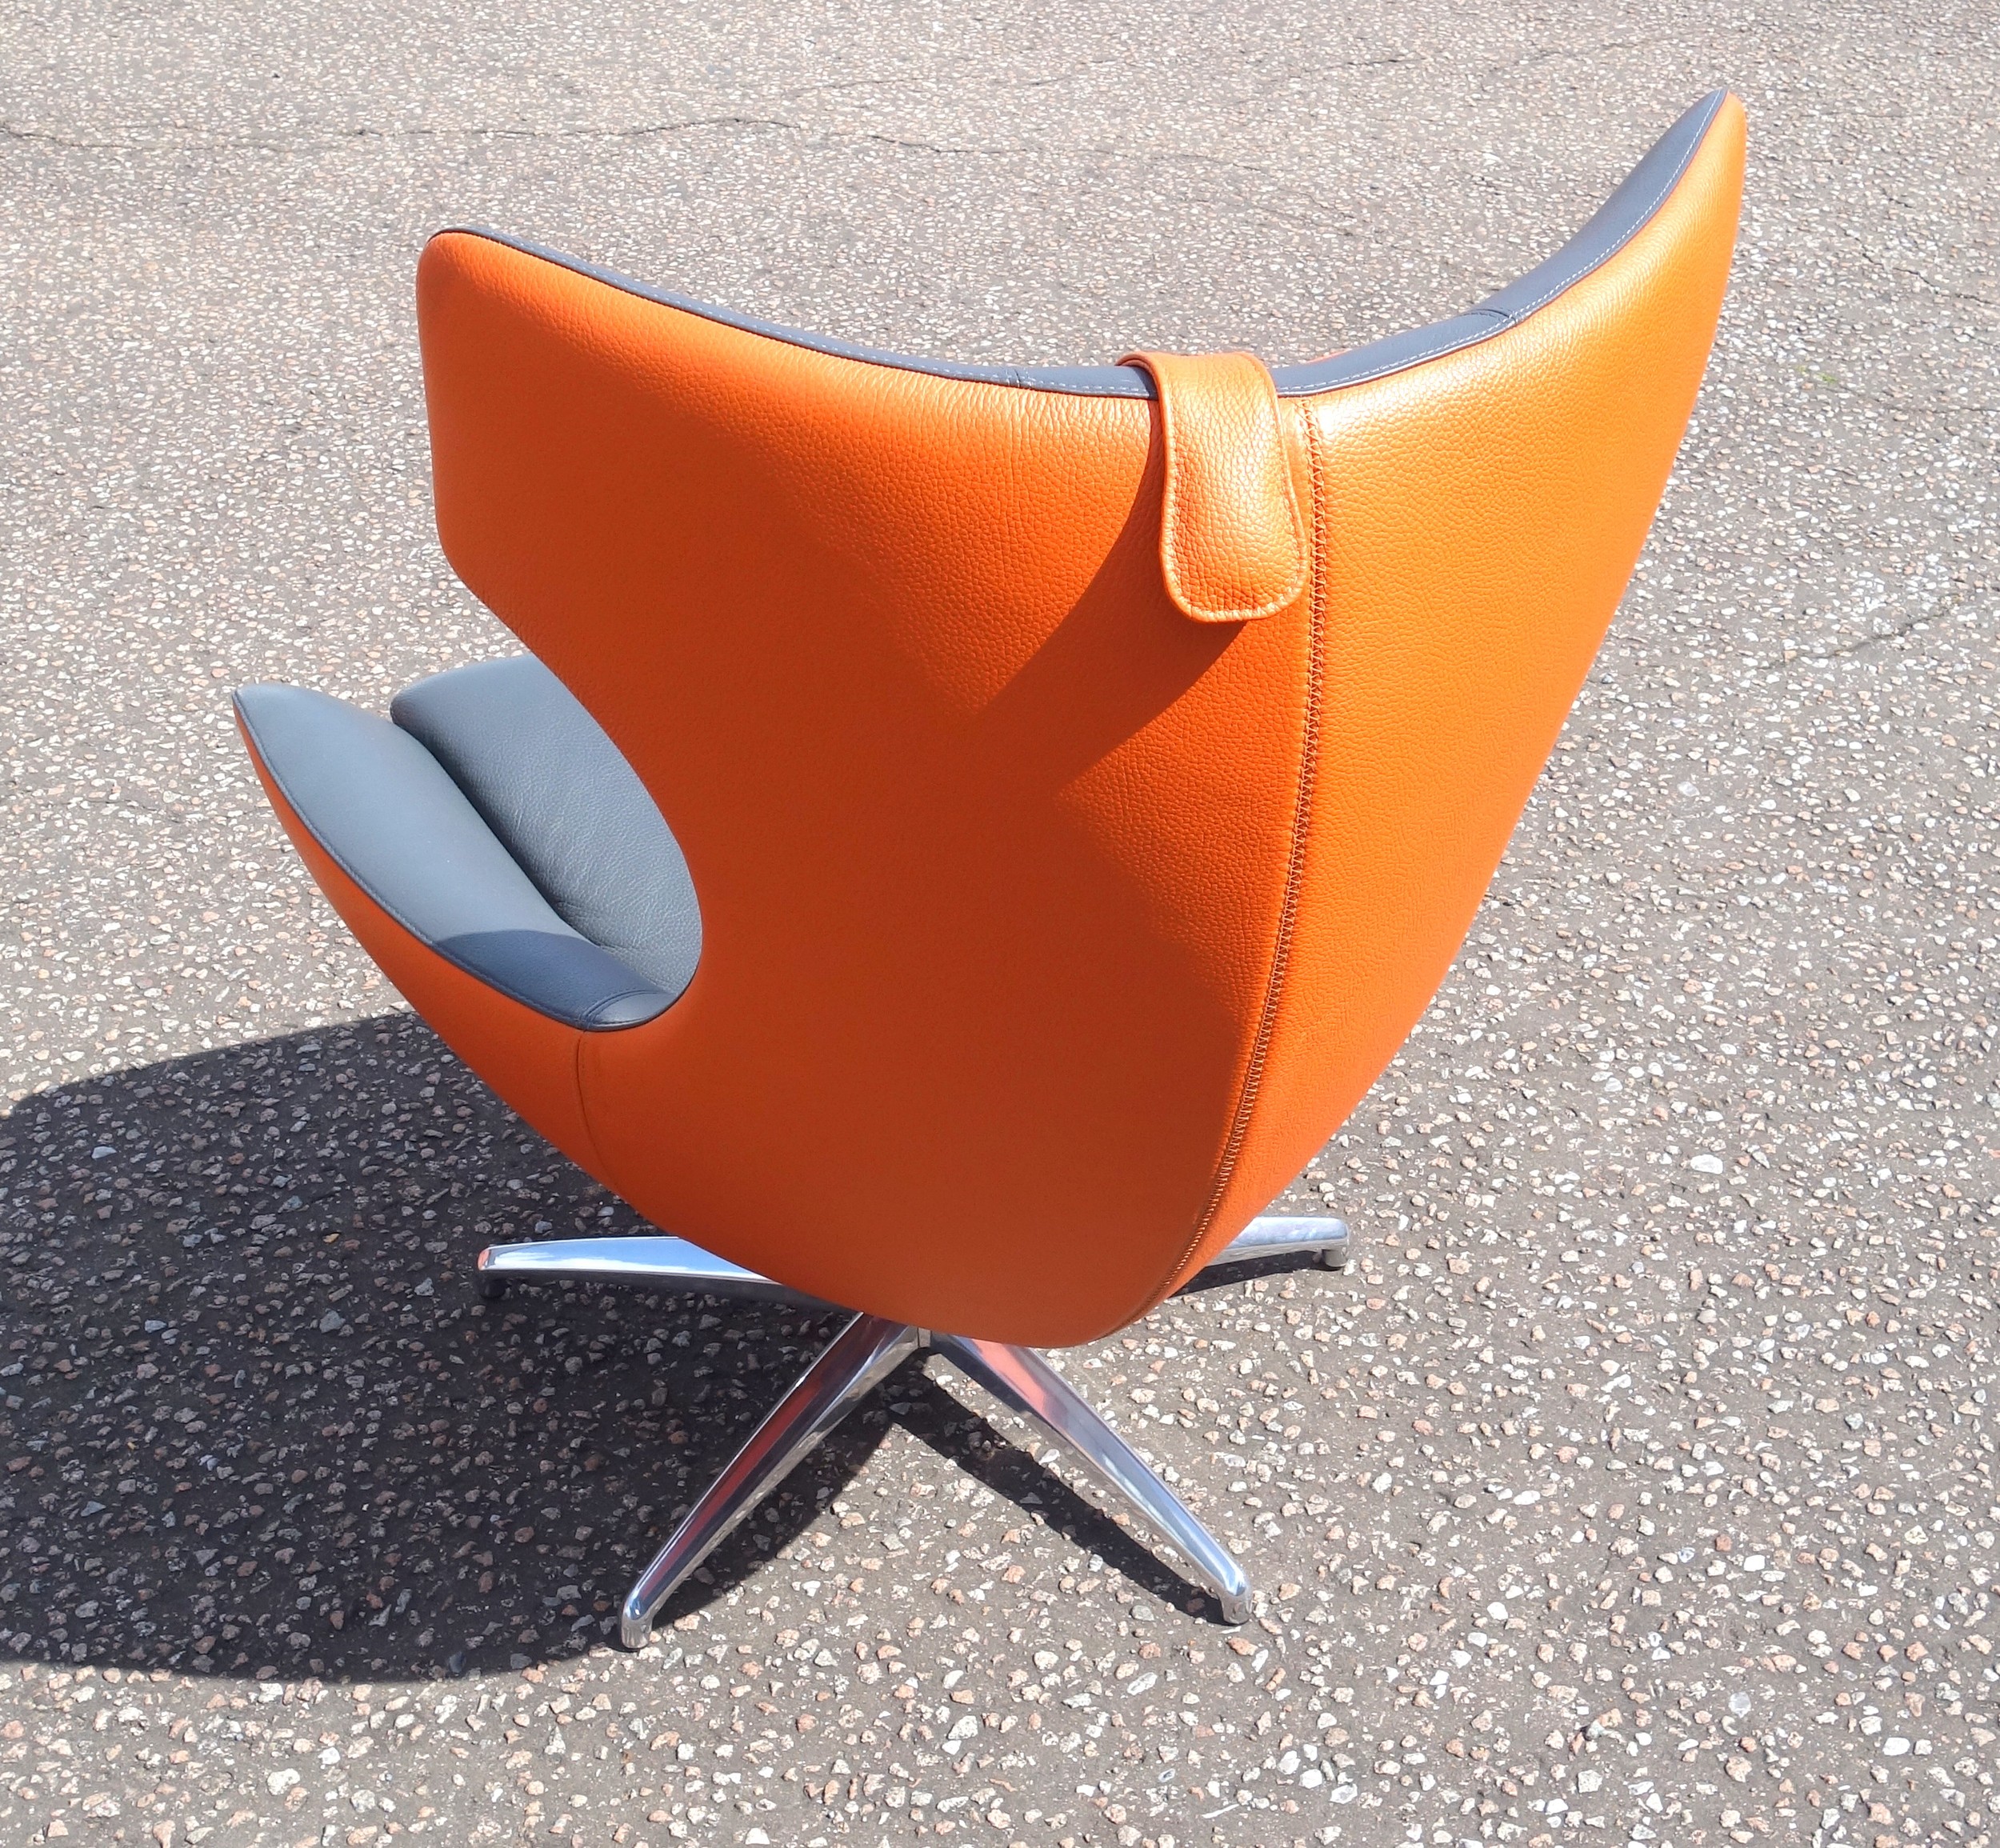 Leolux Caruzzo swivel armchair, designed by Hans Schrofer, launched 2015, custom made with orange - Image 3 of 6